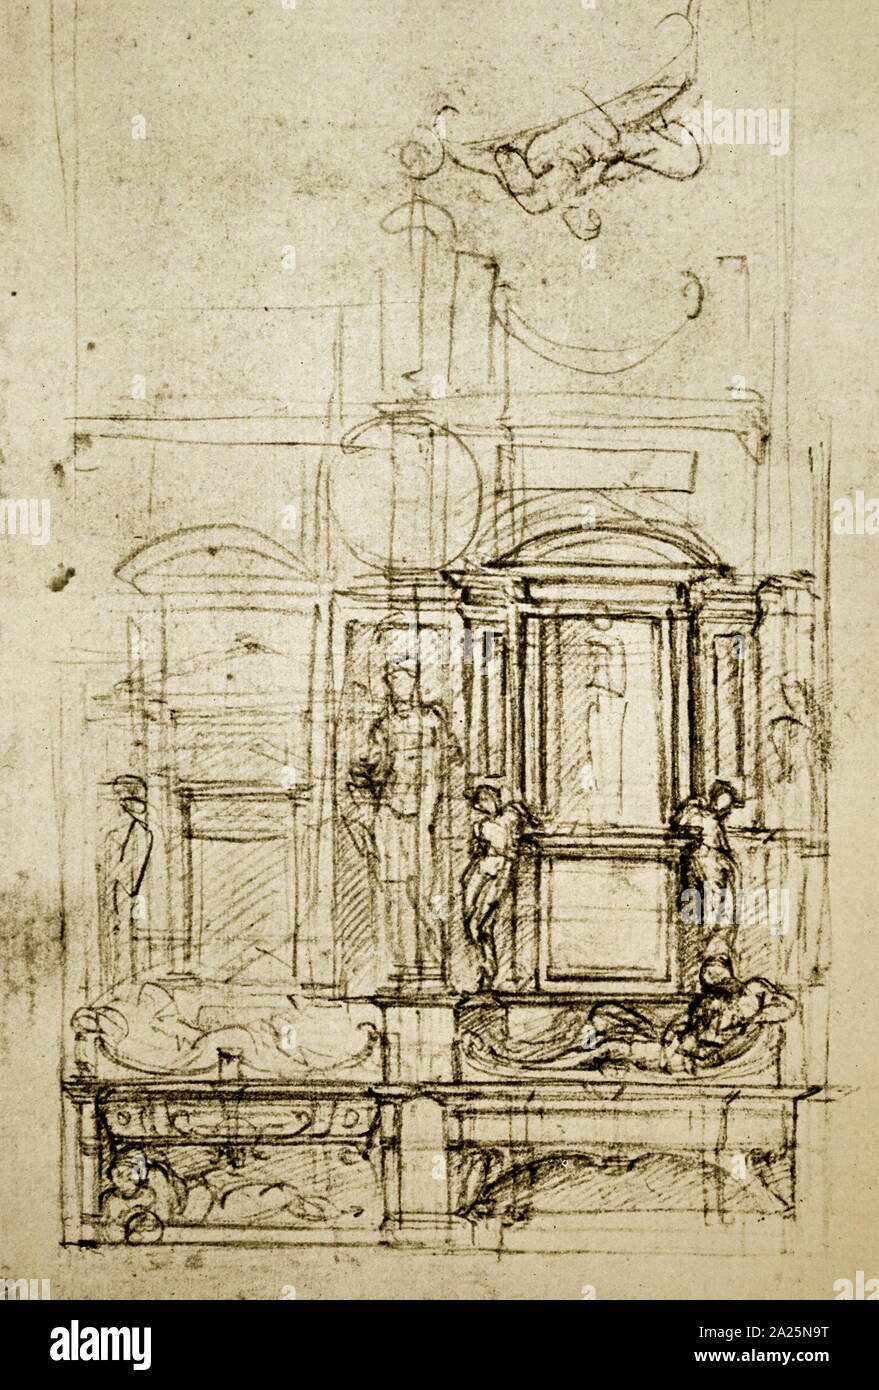 School of Michelangelo Buonarroti  A Figure and Some Architectural  Details  The Metropolitan Museum of Art